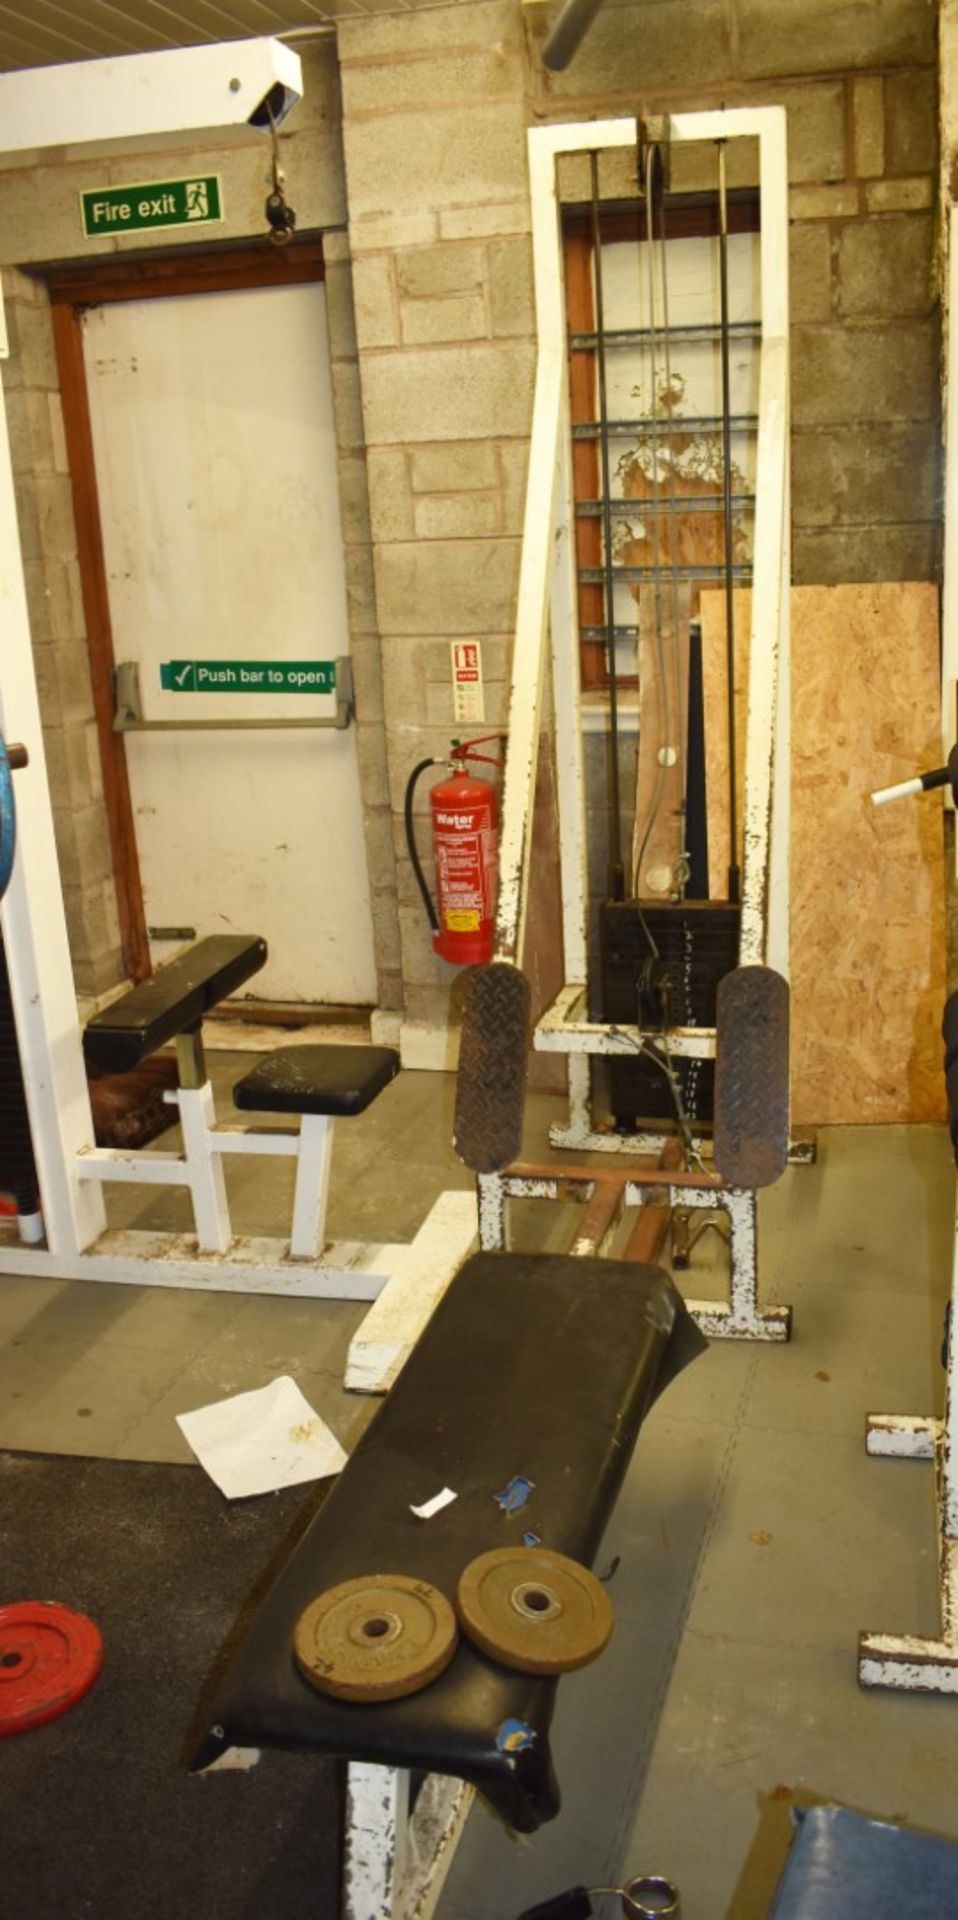 Contents of Bodybuilding and Strongman Gym - Includes Approx 30 Pieces of Gym Equipment, Floor Mats, - Image 30 of 31